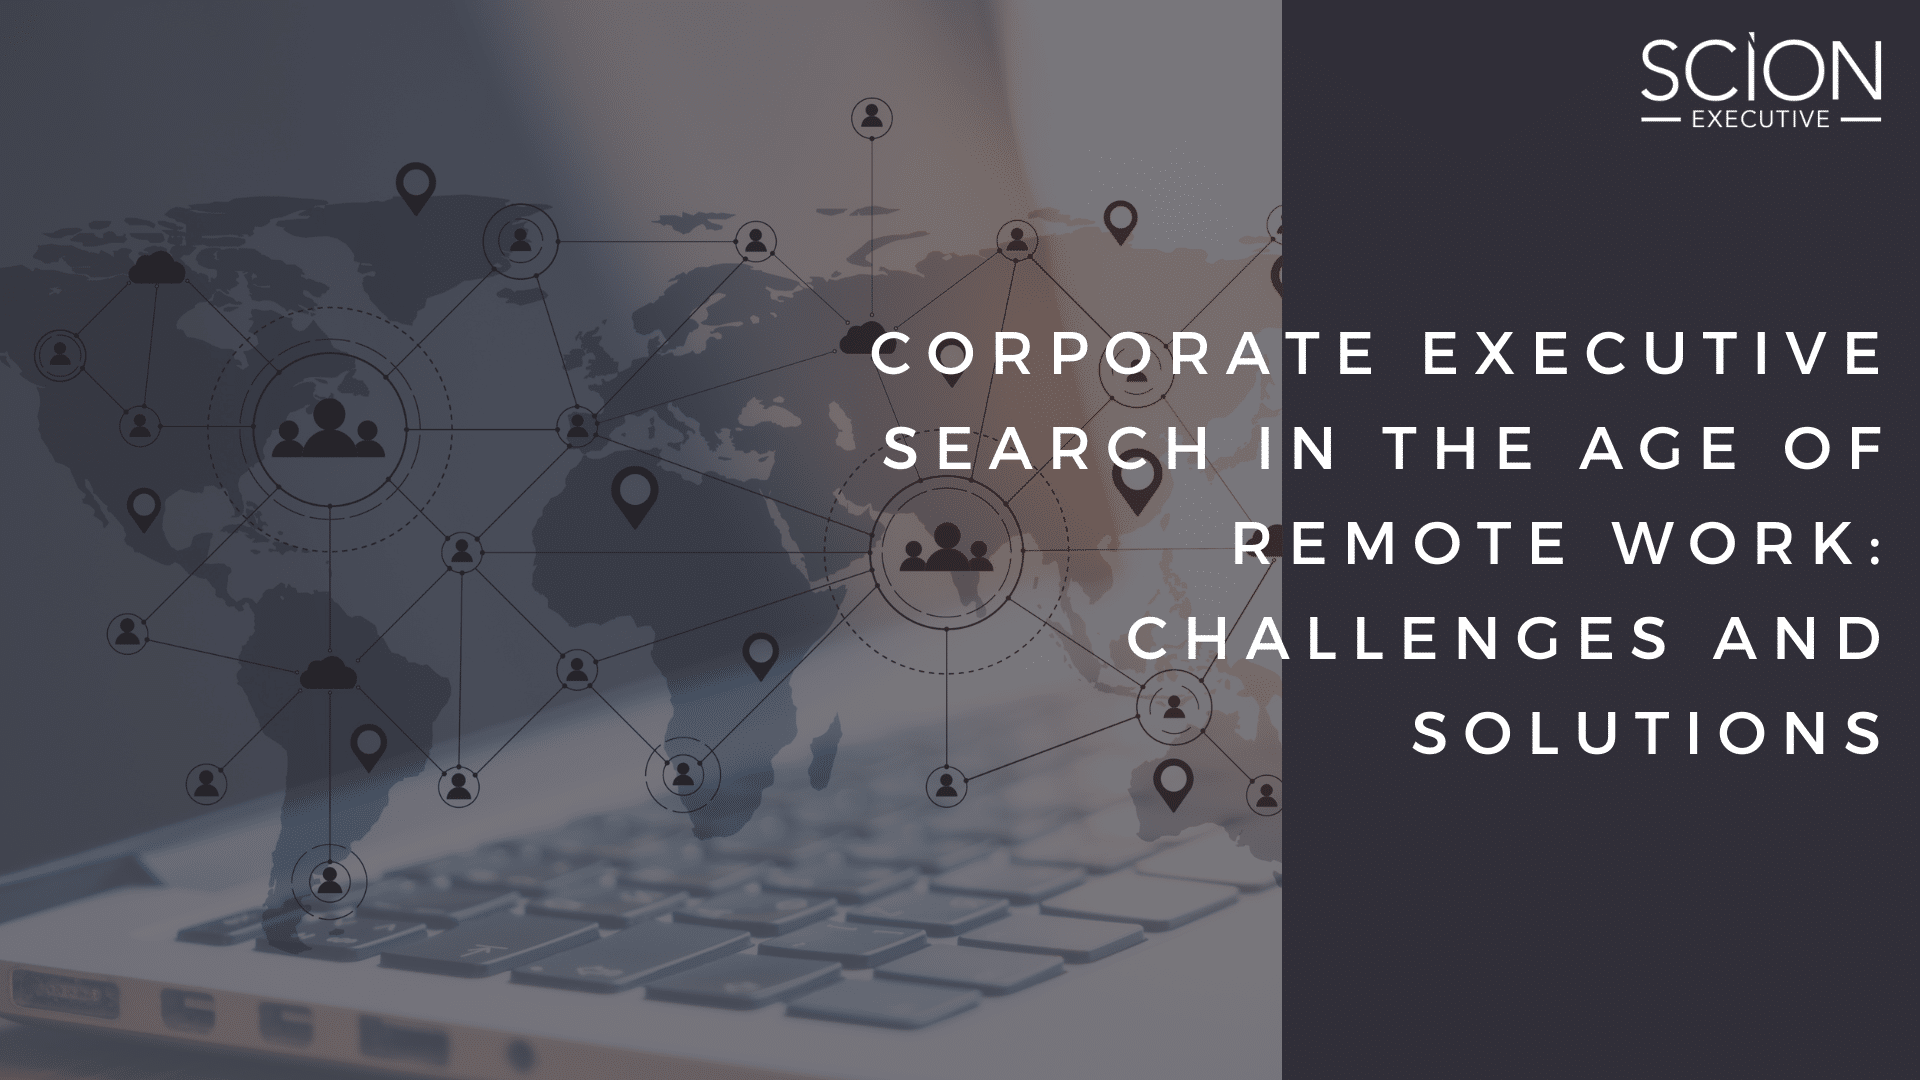 Corporate Executive Search in the Age of Remote Work Challenges and Solutions